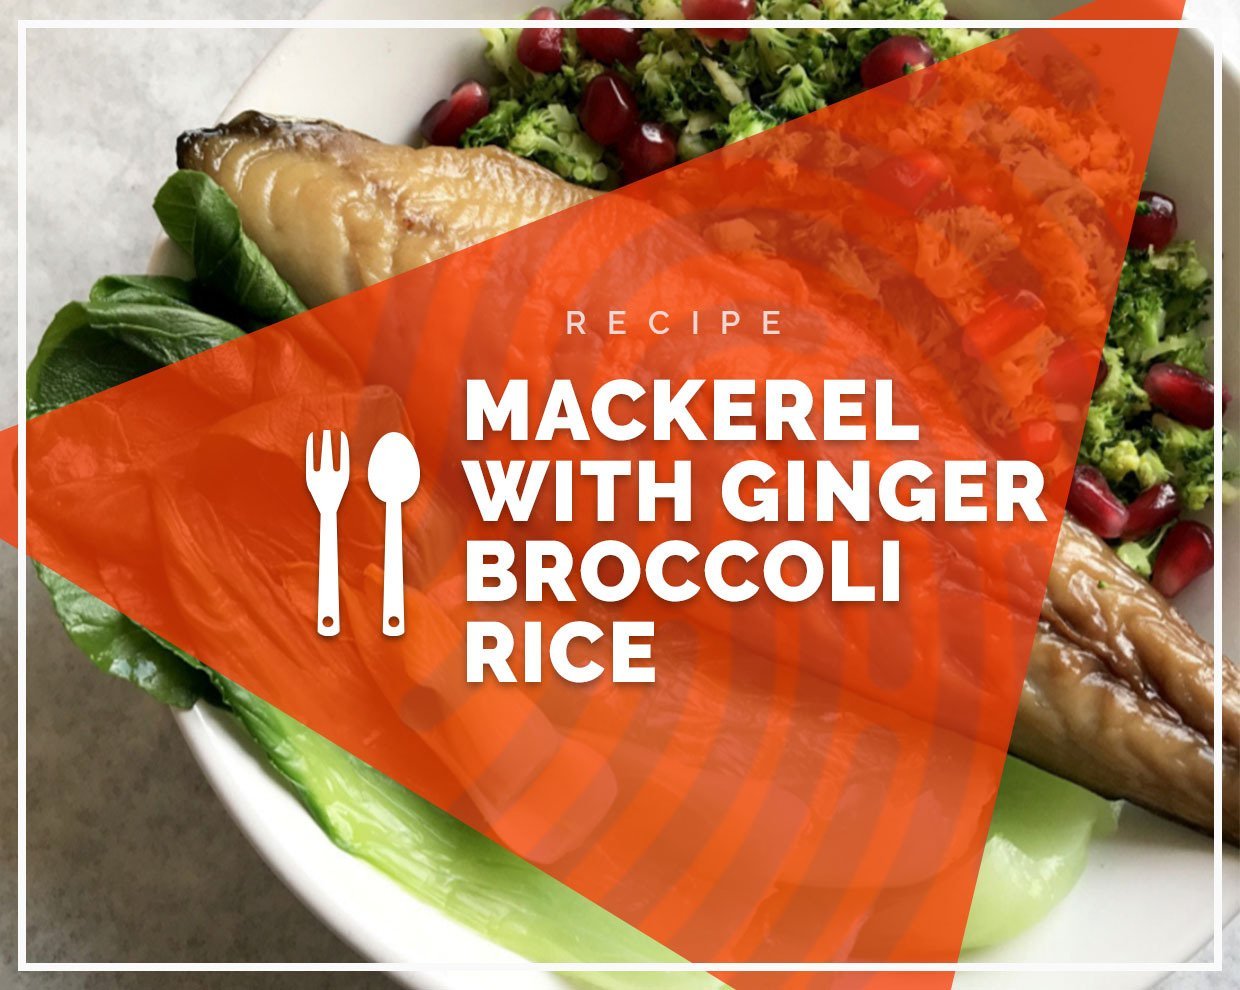 Mackerel with ginger broccoli rice 